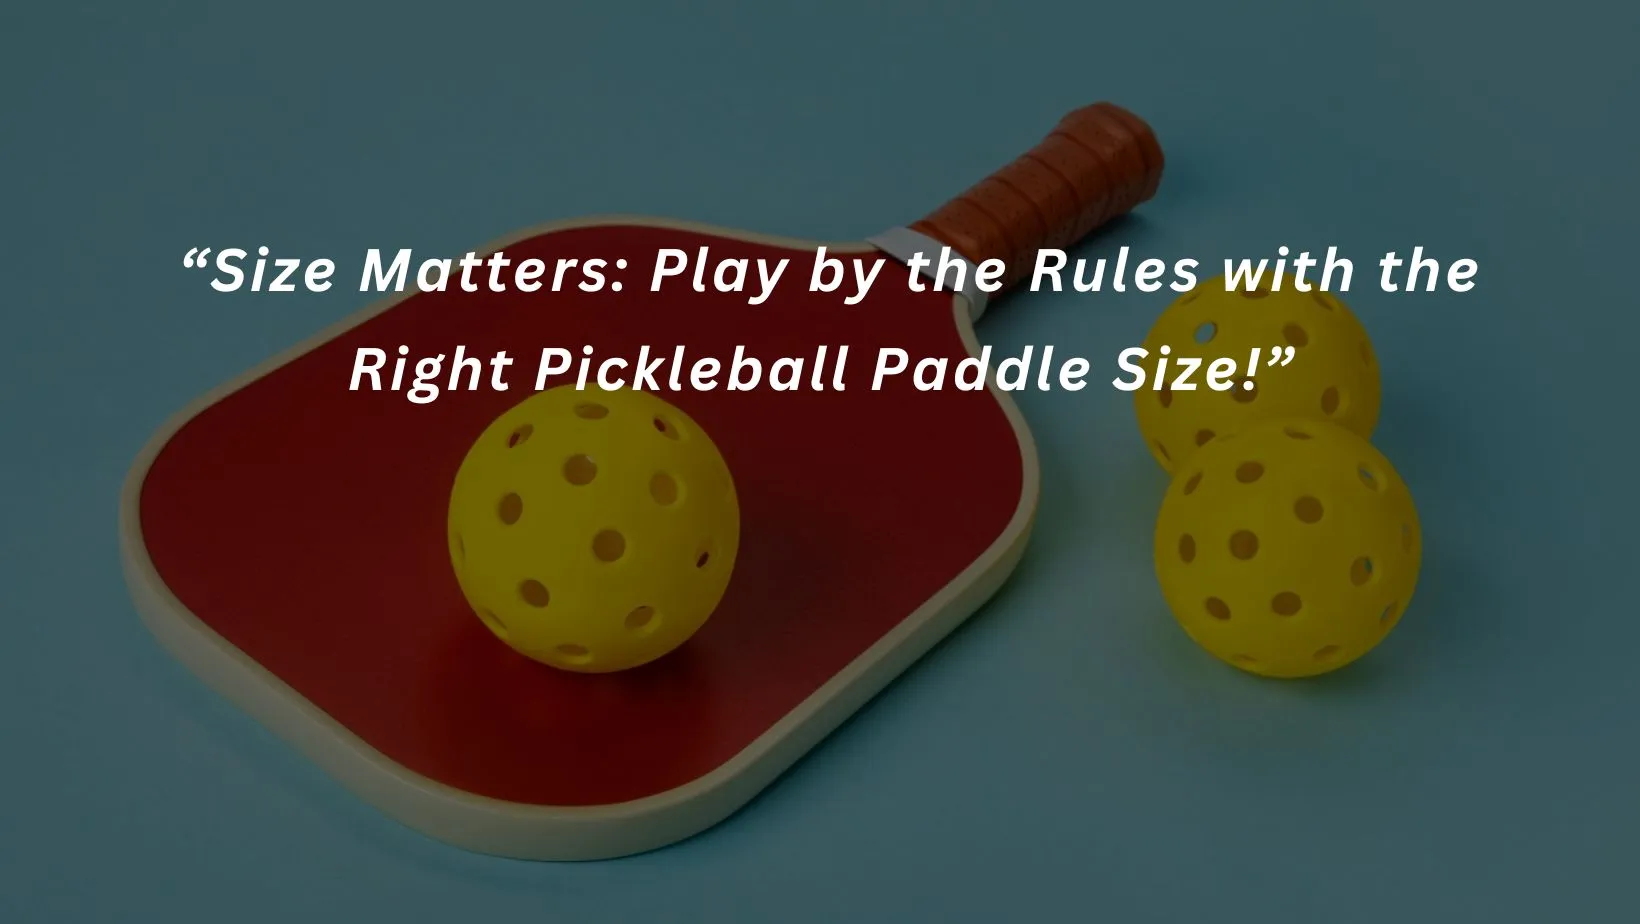 Pickleball Paddle size rules and regulations